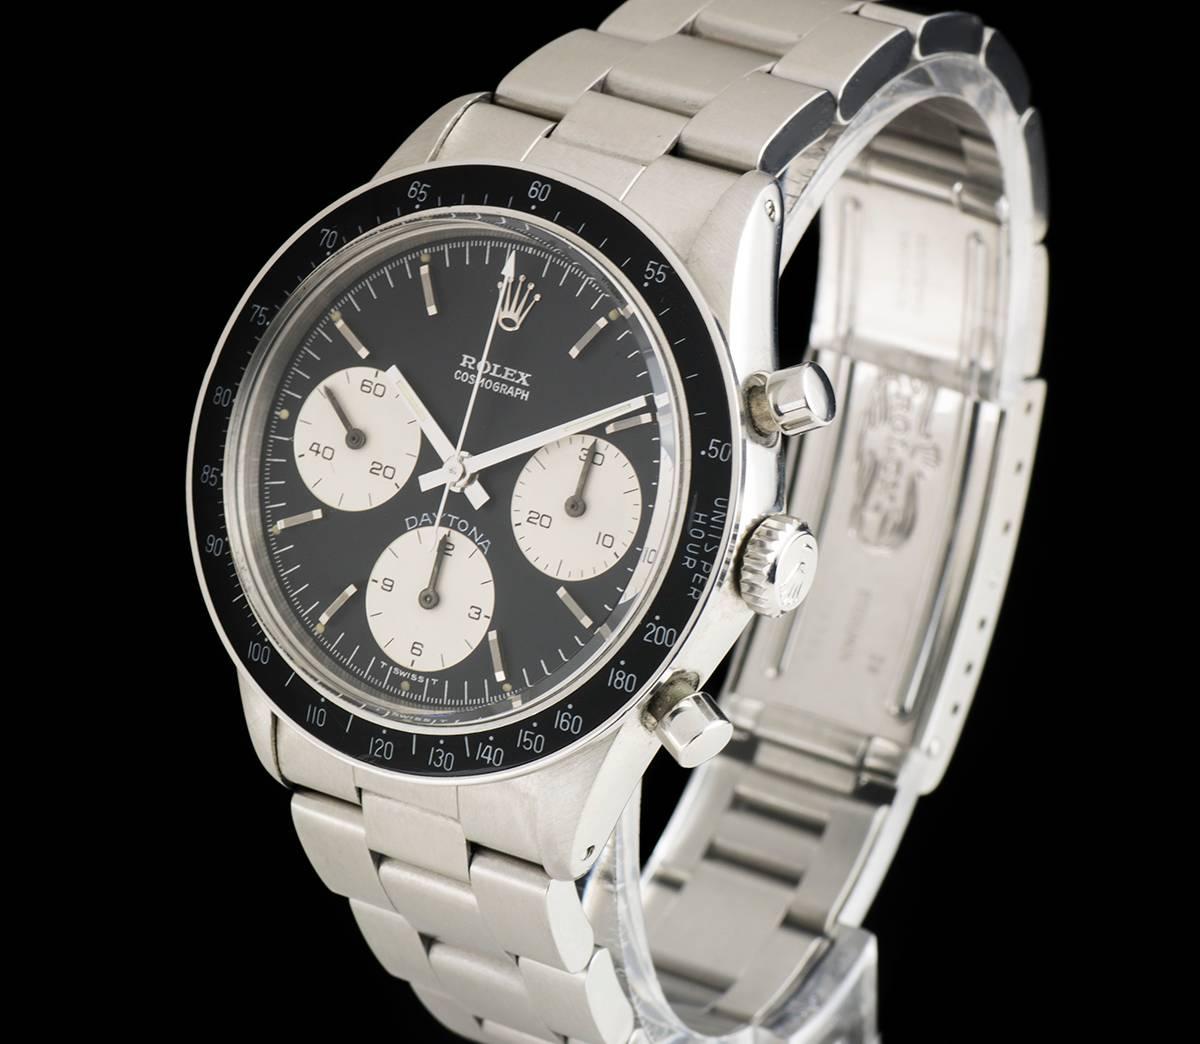 A Very Rare Stainless Steel Cosmograph Daytona Vintage Gents Wristwatch, black dial with applied hour markers and silver sub-dials, 30 minute recorder at 3 0'clock, 12 hour recorder at 6 0'clock, small seconds at 9 0'clock, a fixed stainless steel